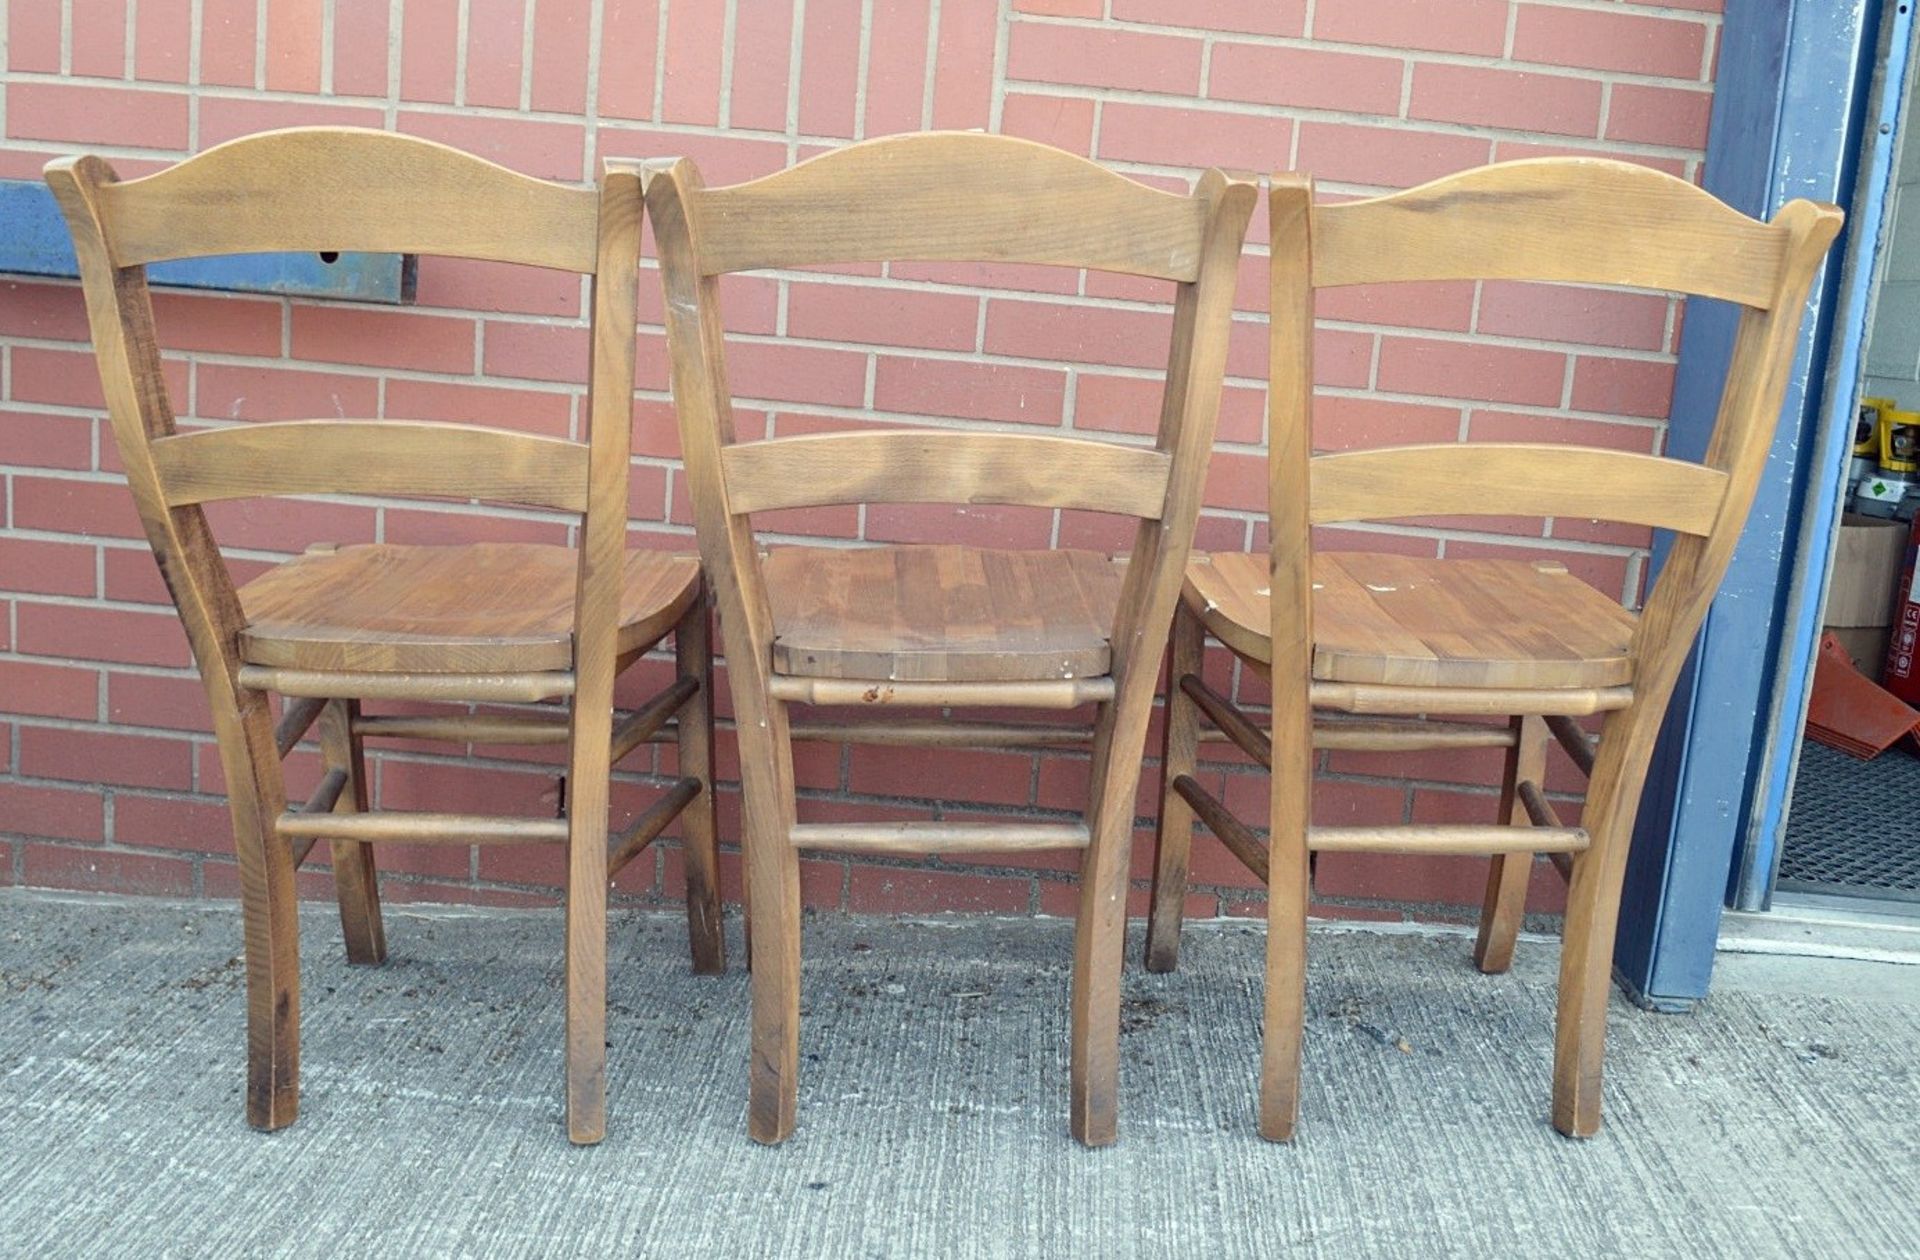 3 x Matching Sturdy Solid Wood Chairs With An Attractive Varnished Finish - Dimensions: H90 x W47 - Image 4 of 6